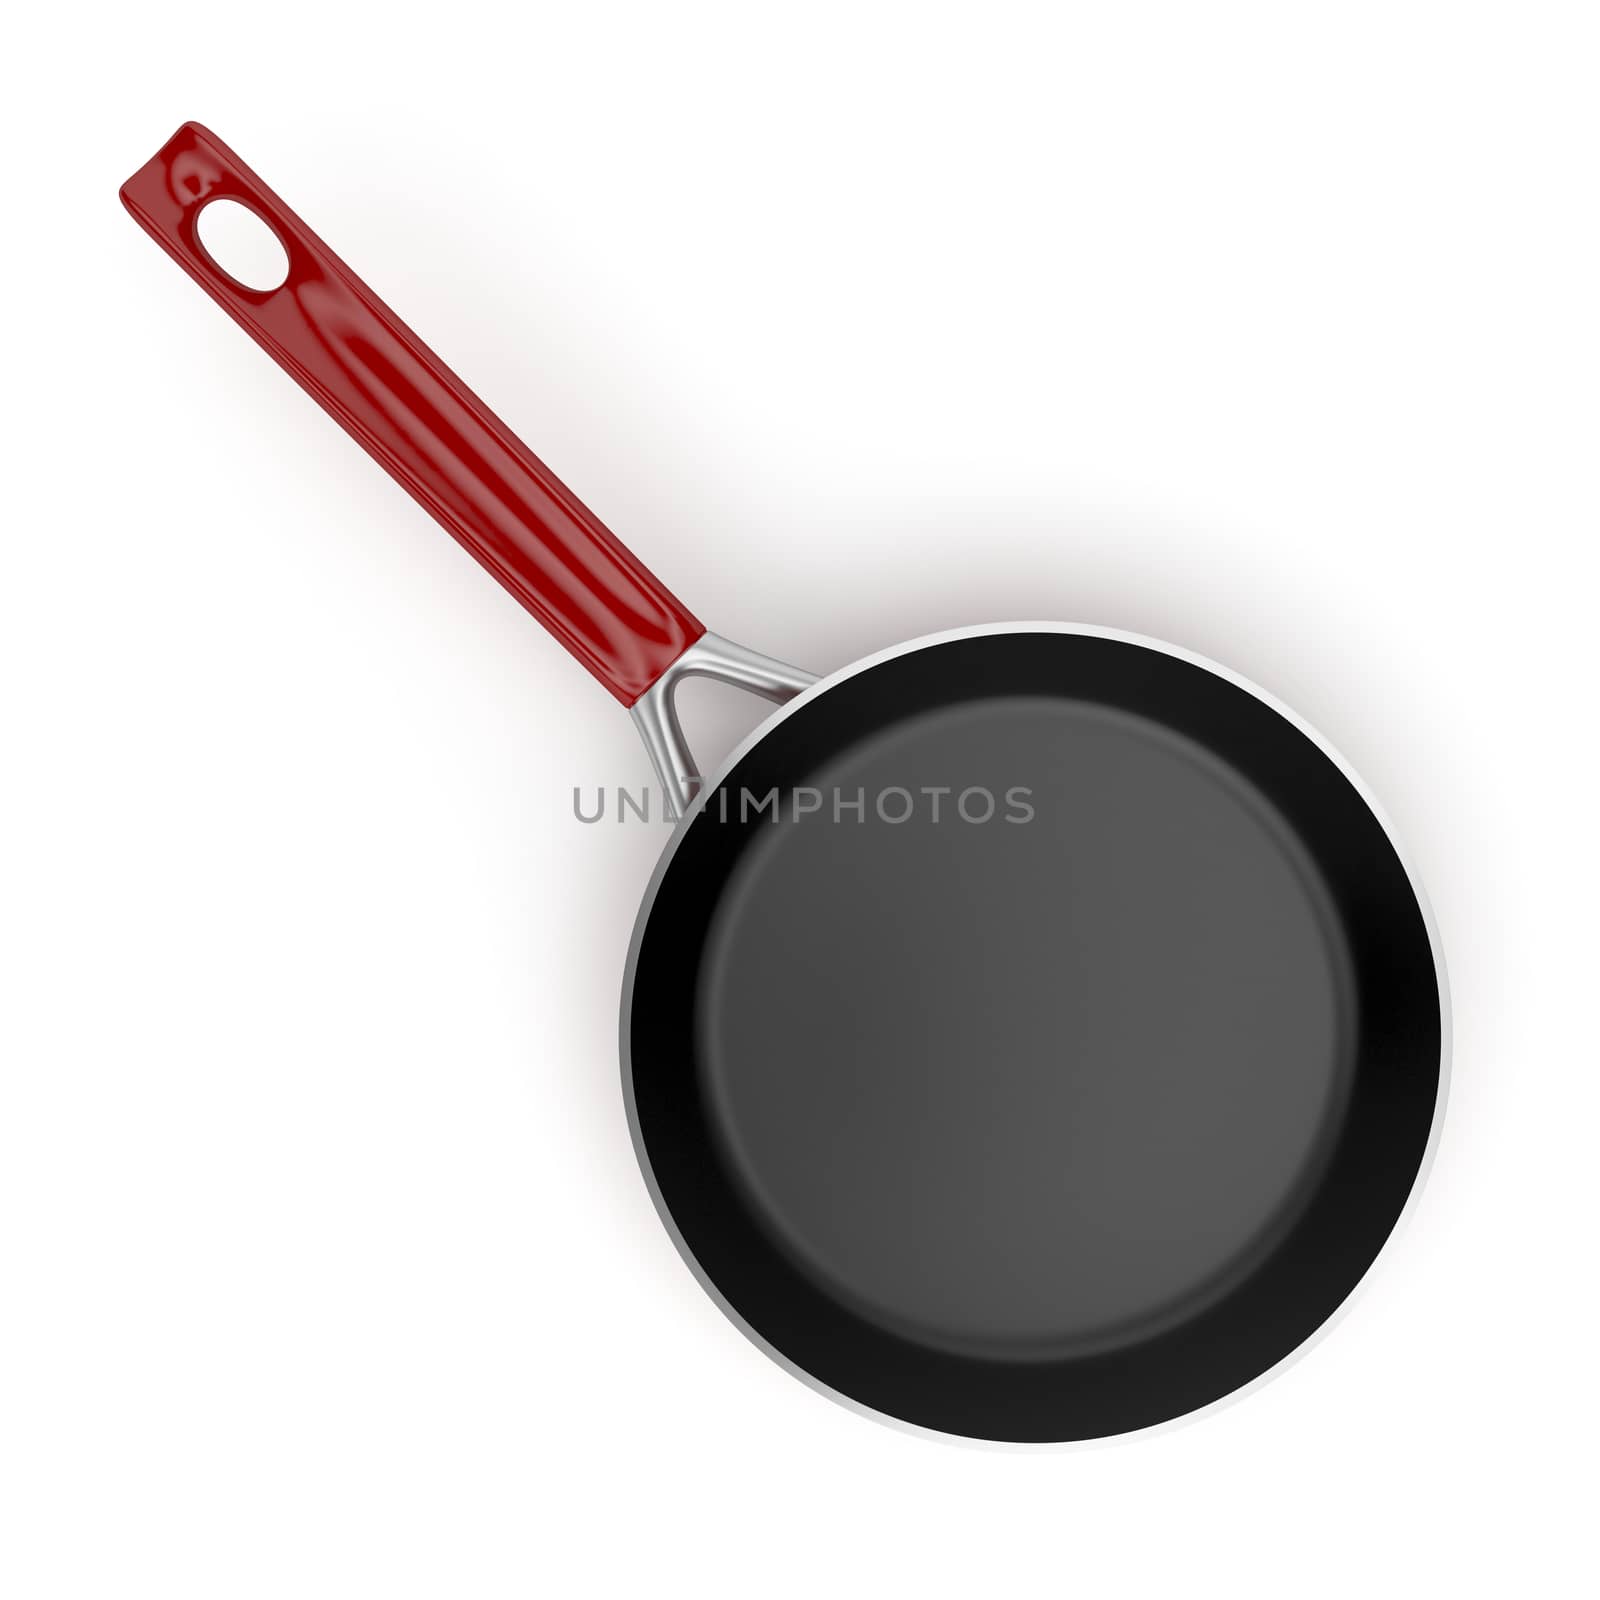 Frying pan by magraphics